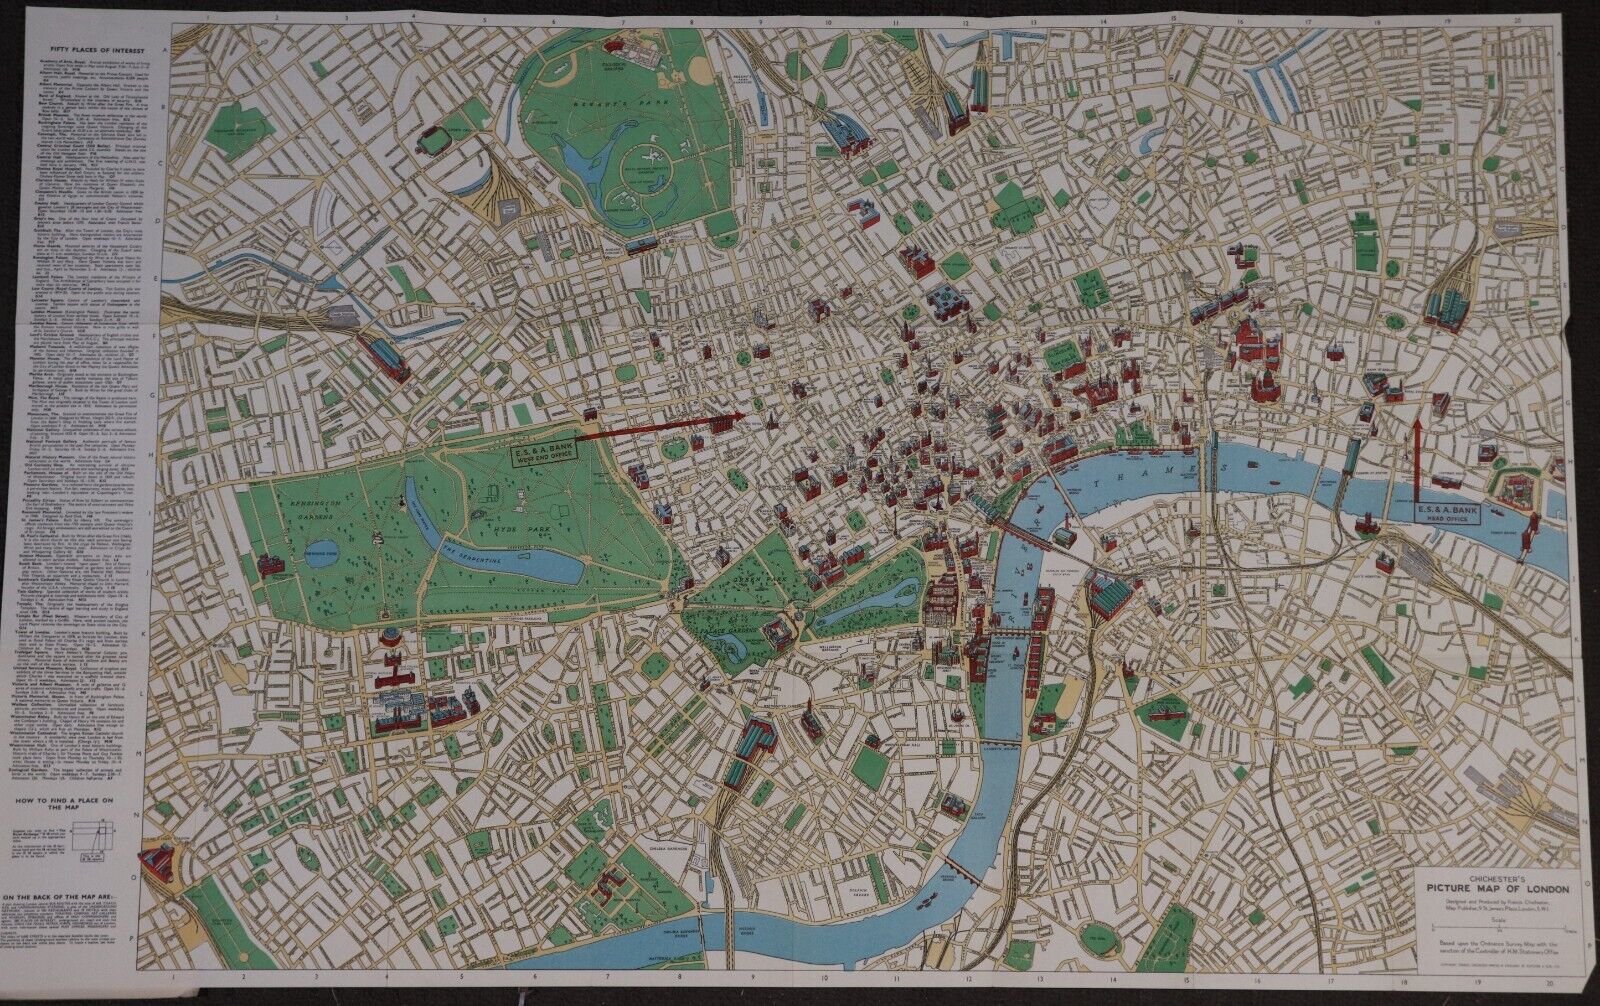 The ES&A Bank: Chichester's Picture Map of London - 1955 - Vintage Map